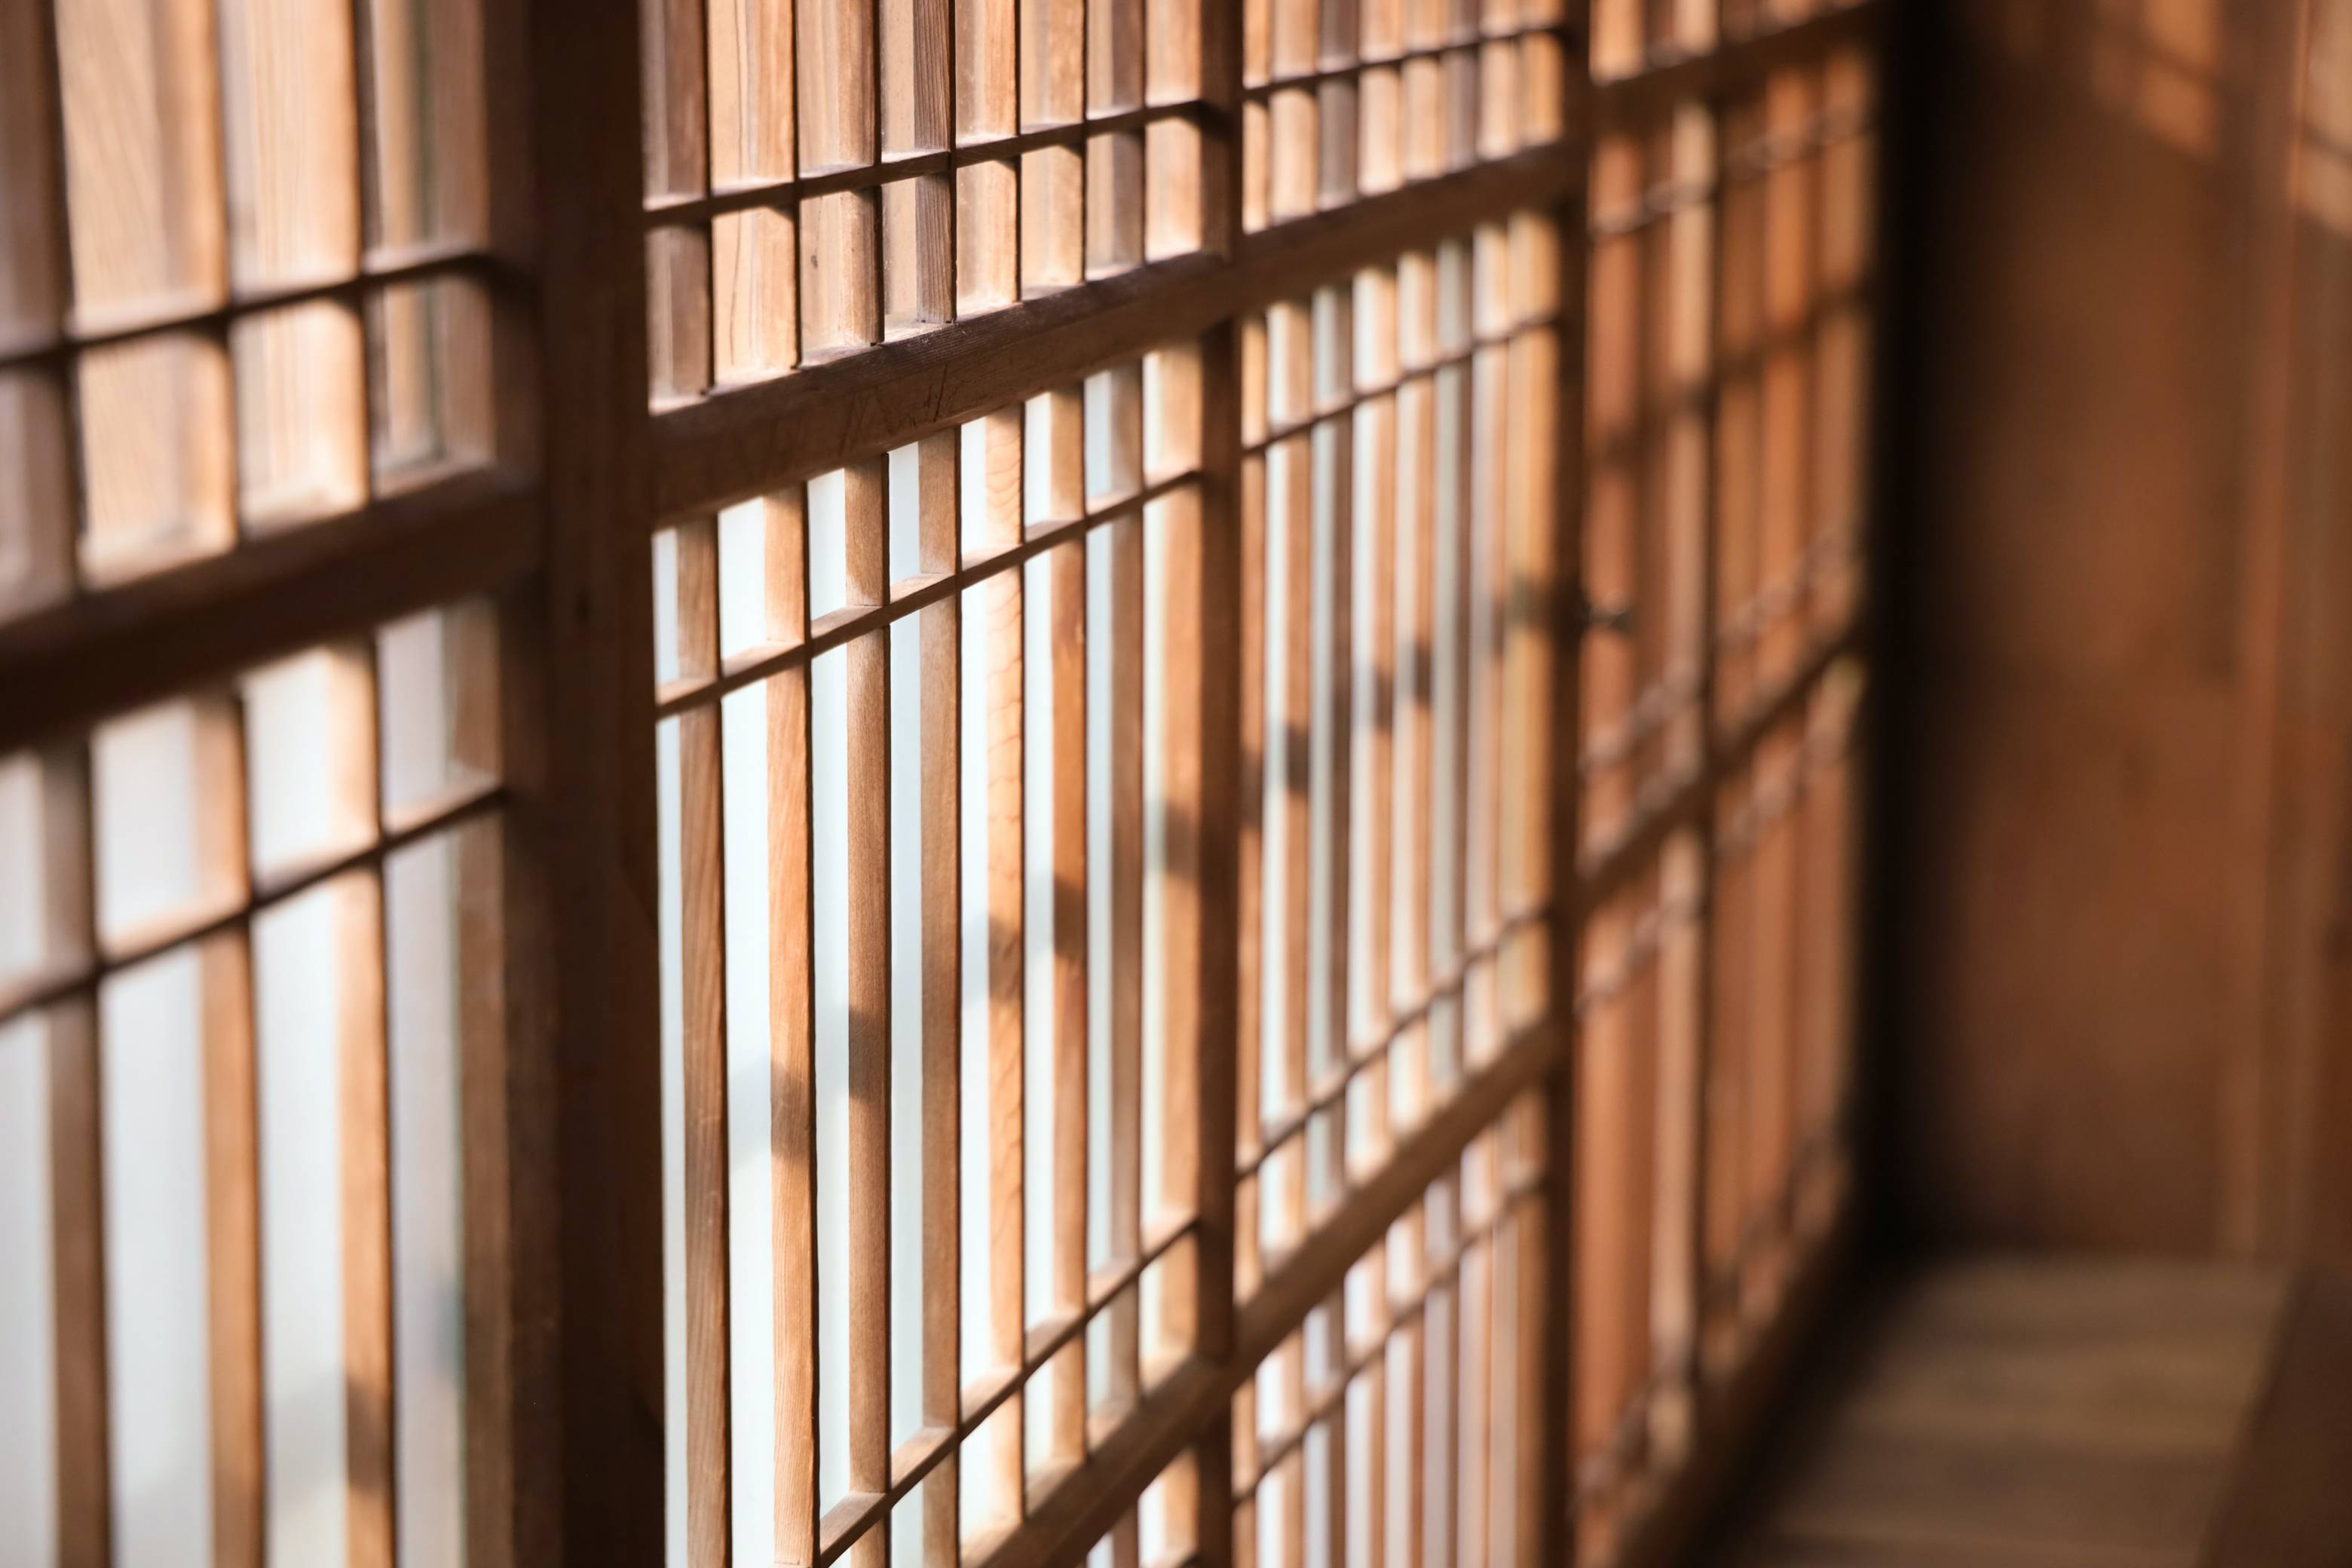 a close up image of shadowy prison bars in a dark room